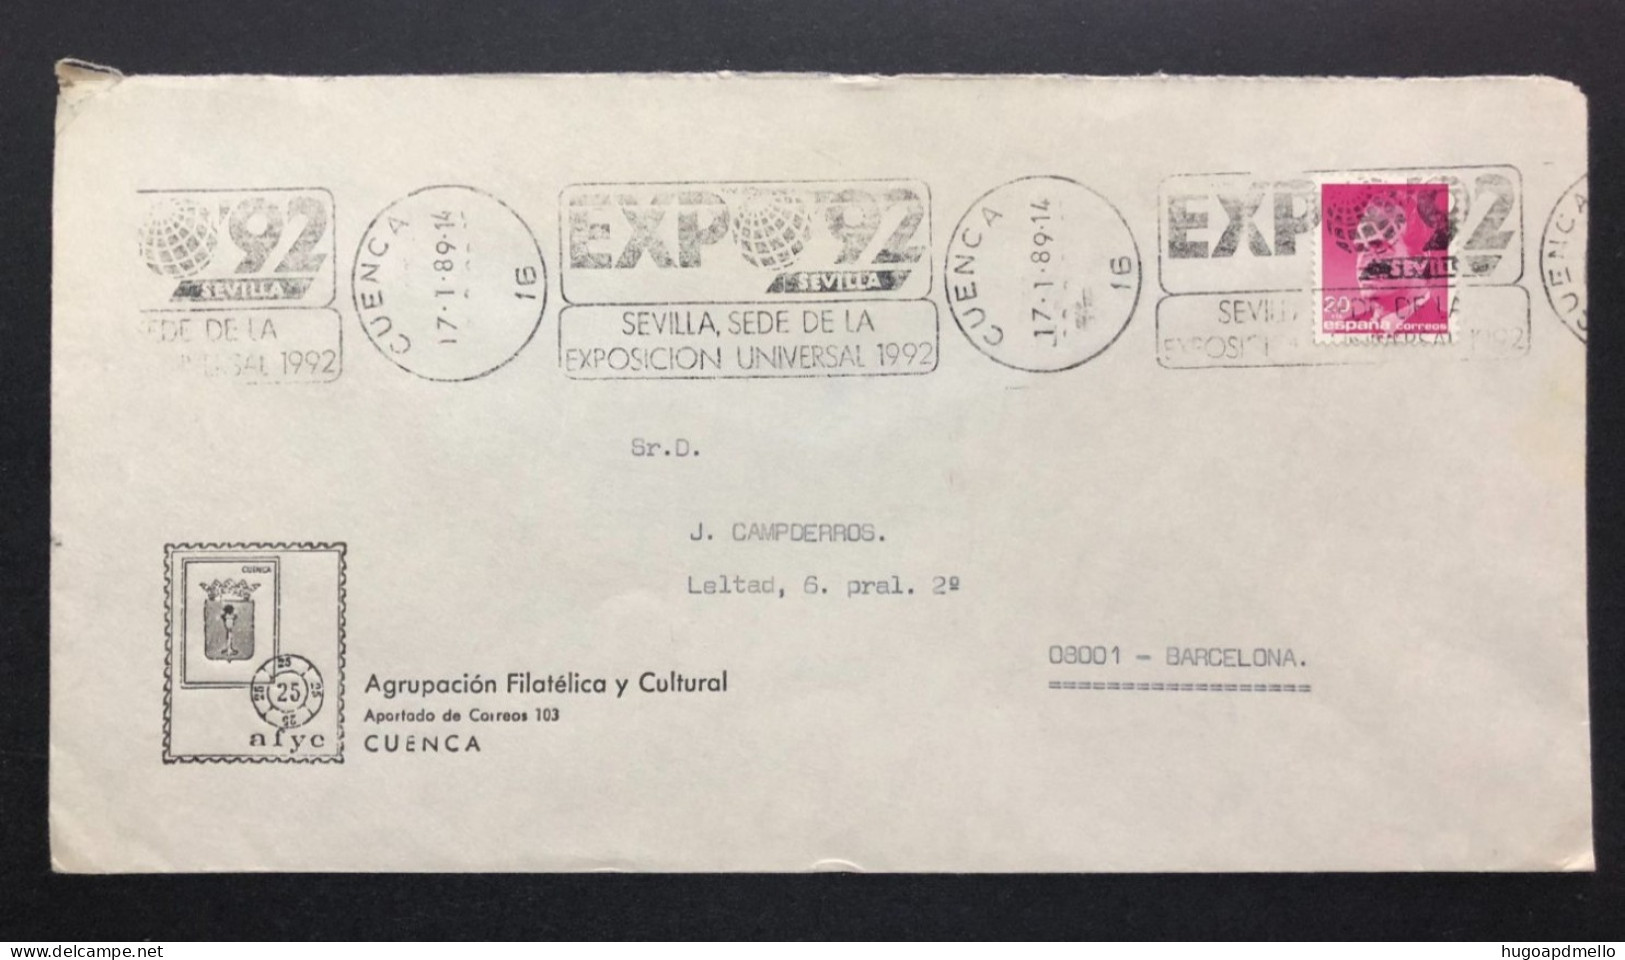 SPAIN, Cover With Special Cancellation « EXPO '92 », « CUENCA Postmark », 1989 - 1992 – Séville (Espagne)